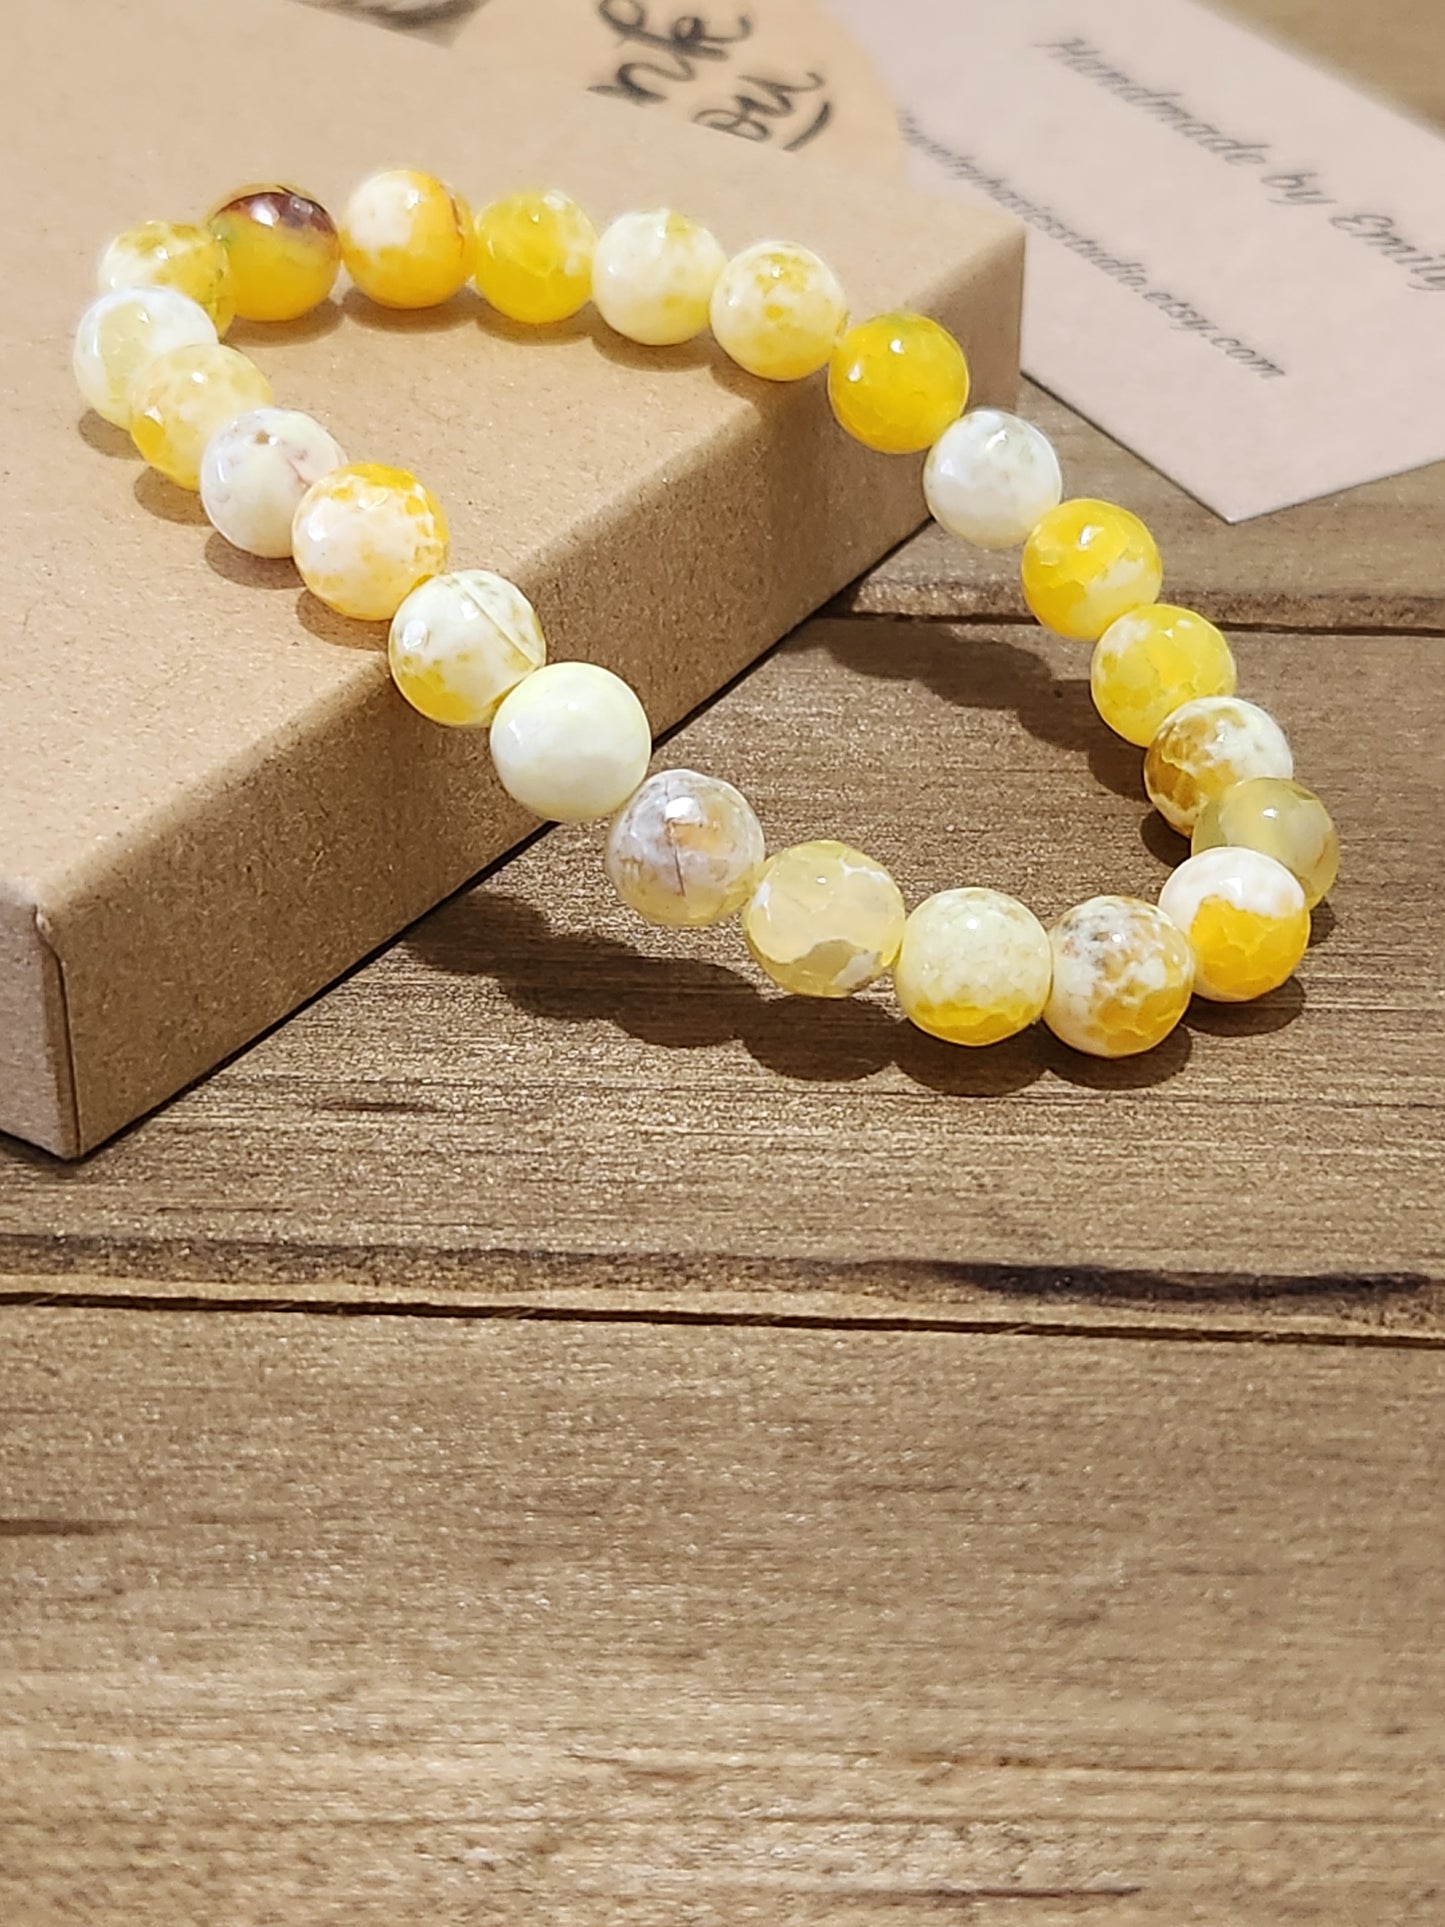 Yellow Crackle Agate Stone Bracelet 6mm stones - calming - concentration - security - courage